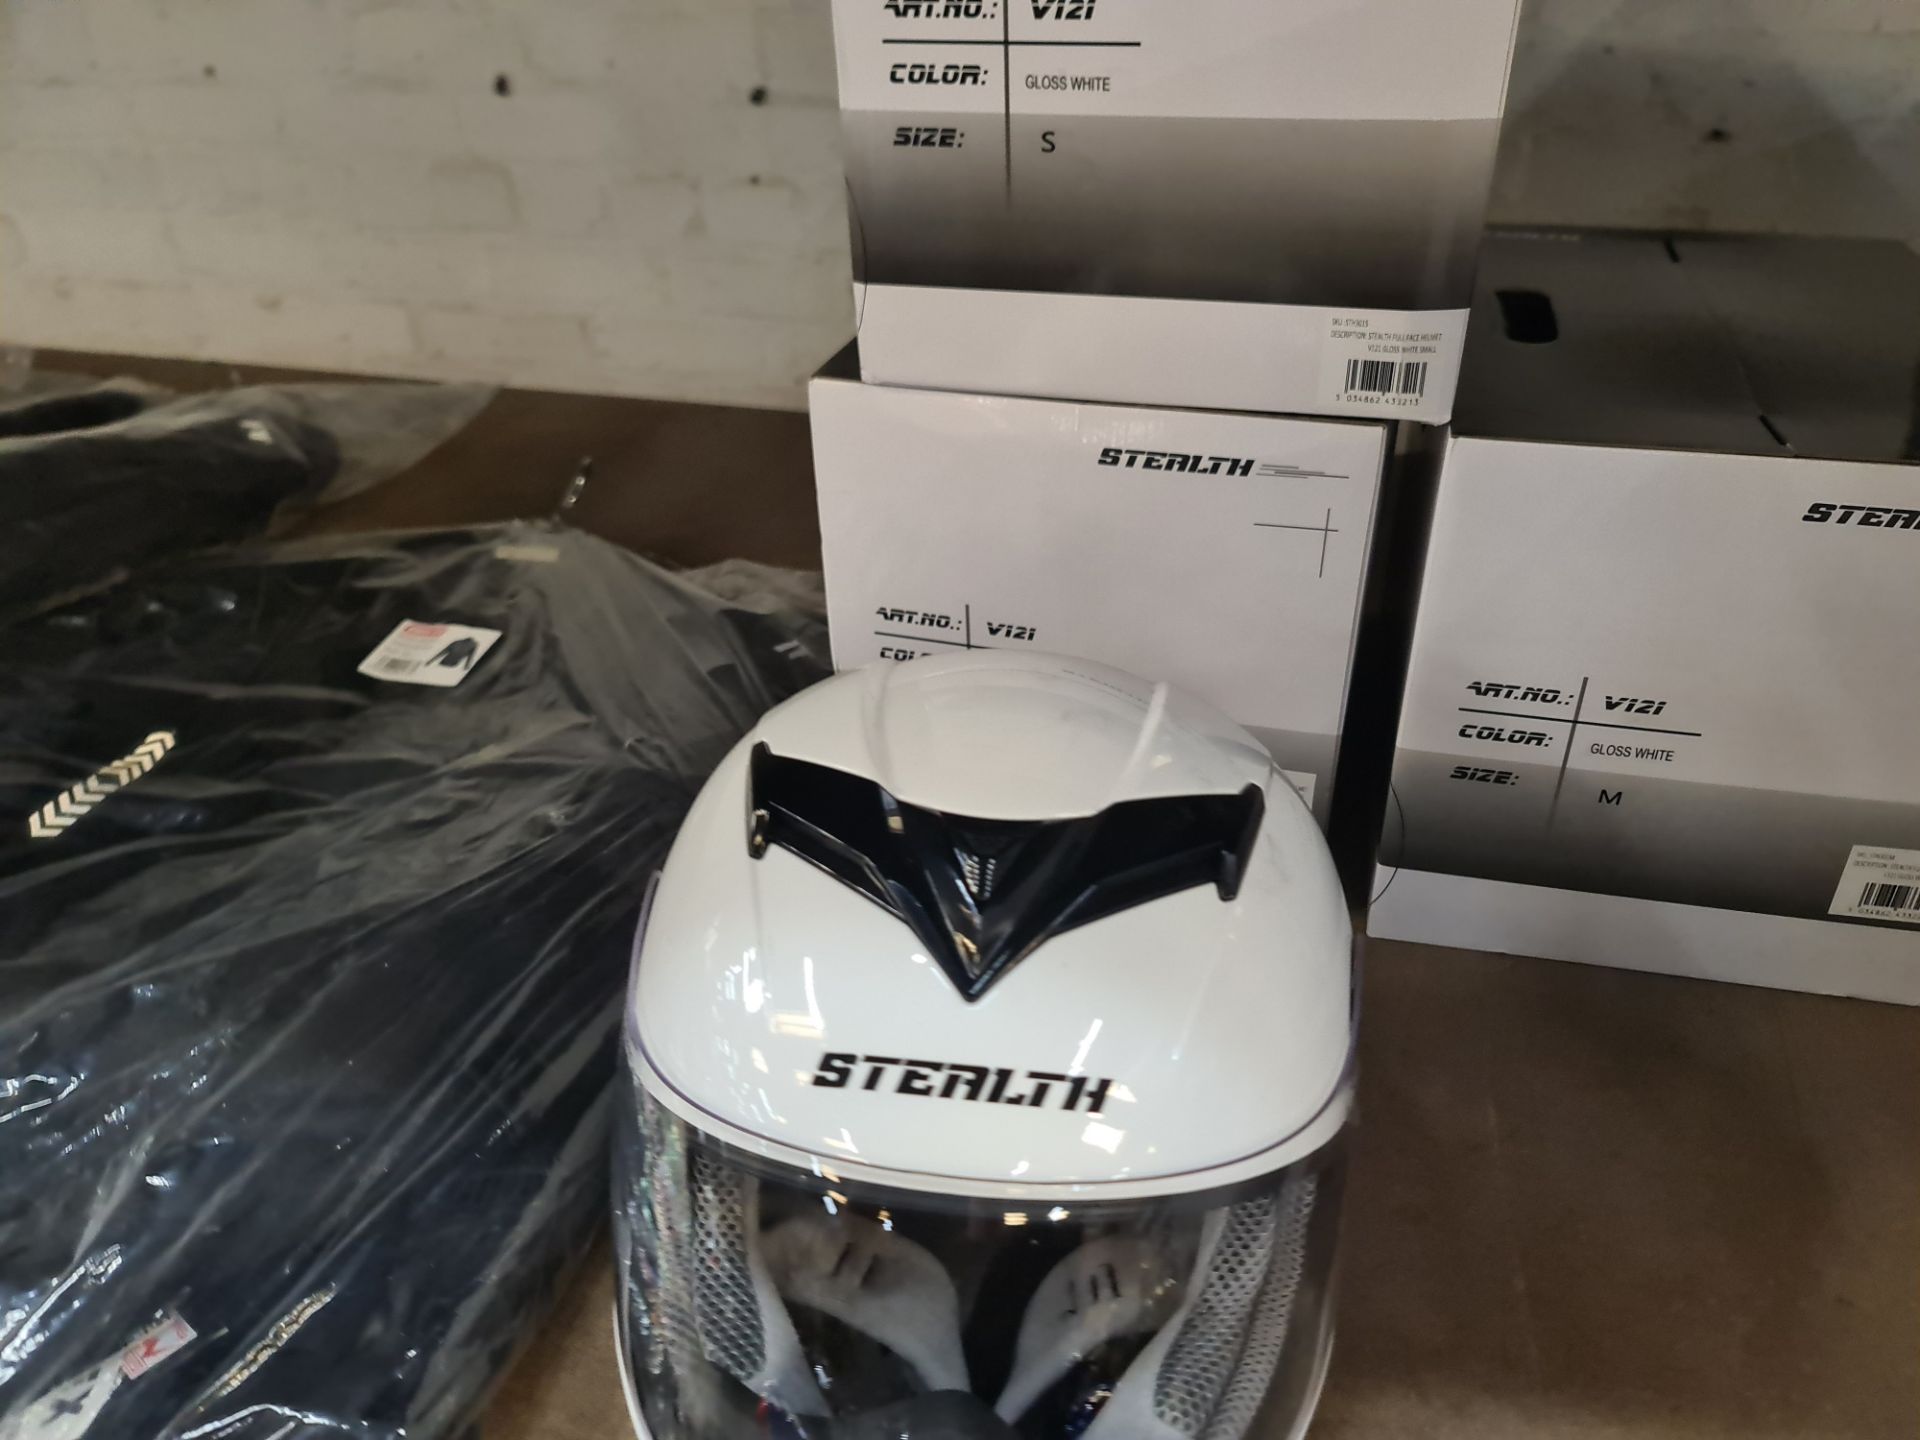 4 off Stealth V121 gloss white helmets - 1 each of S, M, L & XL - Image 4 of 8